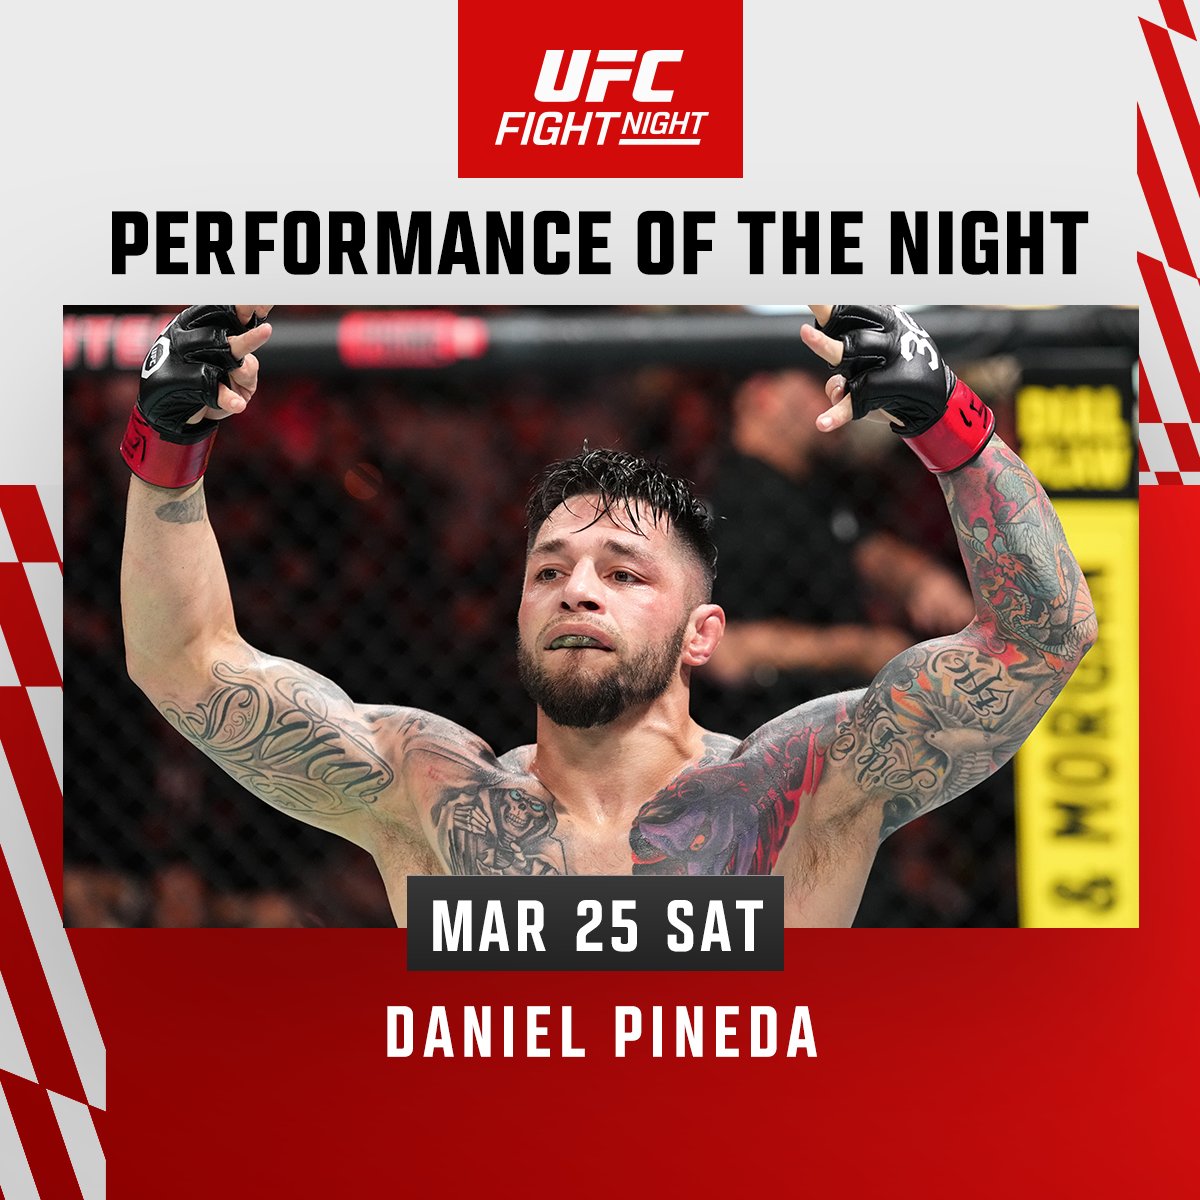 Two guys who are always looking for the finish 👀 💰 @NateTheTrain and @DanielPitPineda grabbed tonight's POTN bonuses! #UFCSanAntonio